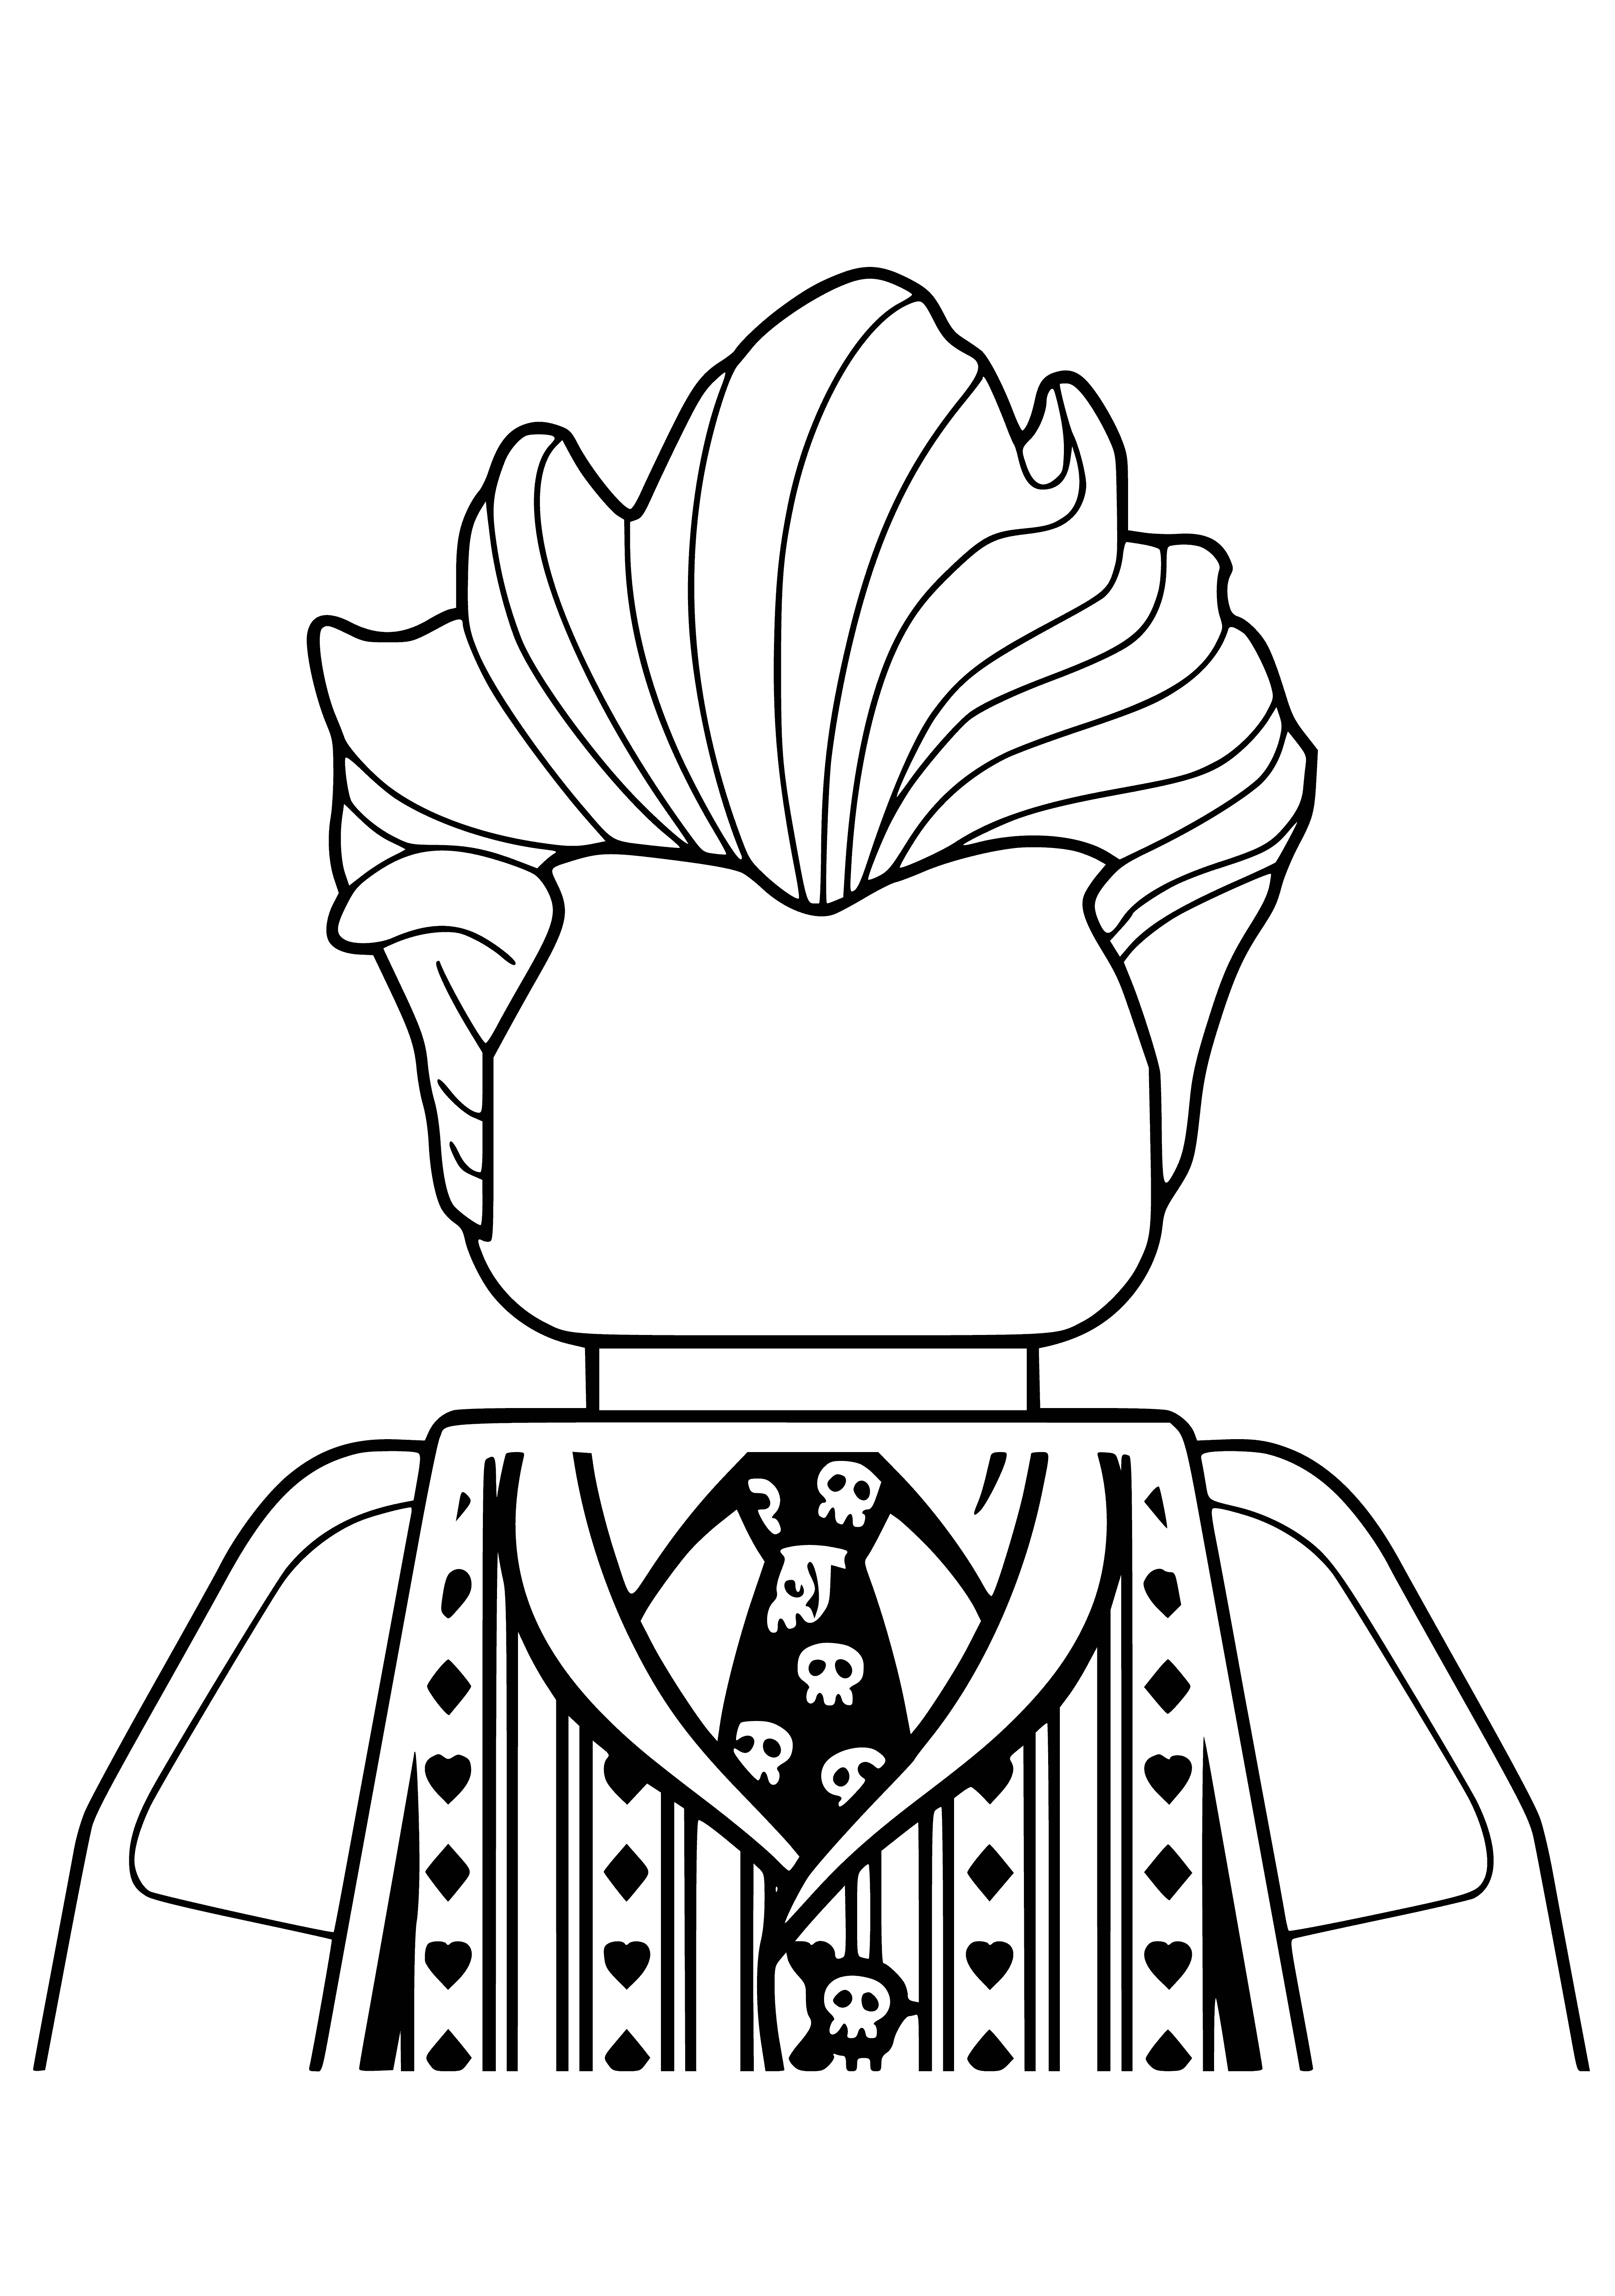 coloring page: The Joker is a short, balding man in a purple suit, green vest & white shirt holding a deck of cards. He has a green ? and purple flower on his lapel. #LEGOBatmanJoker